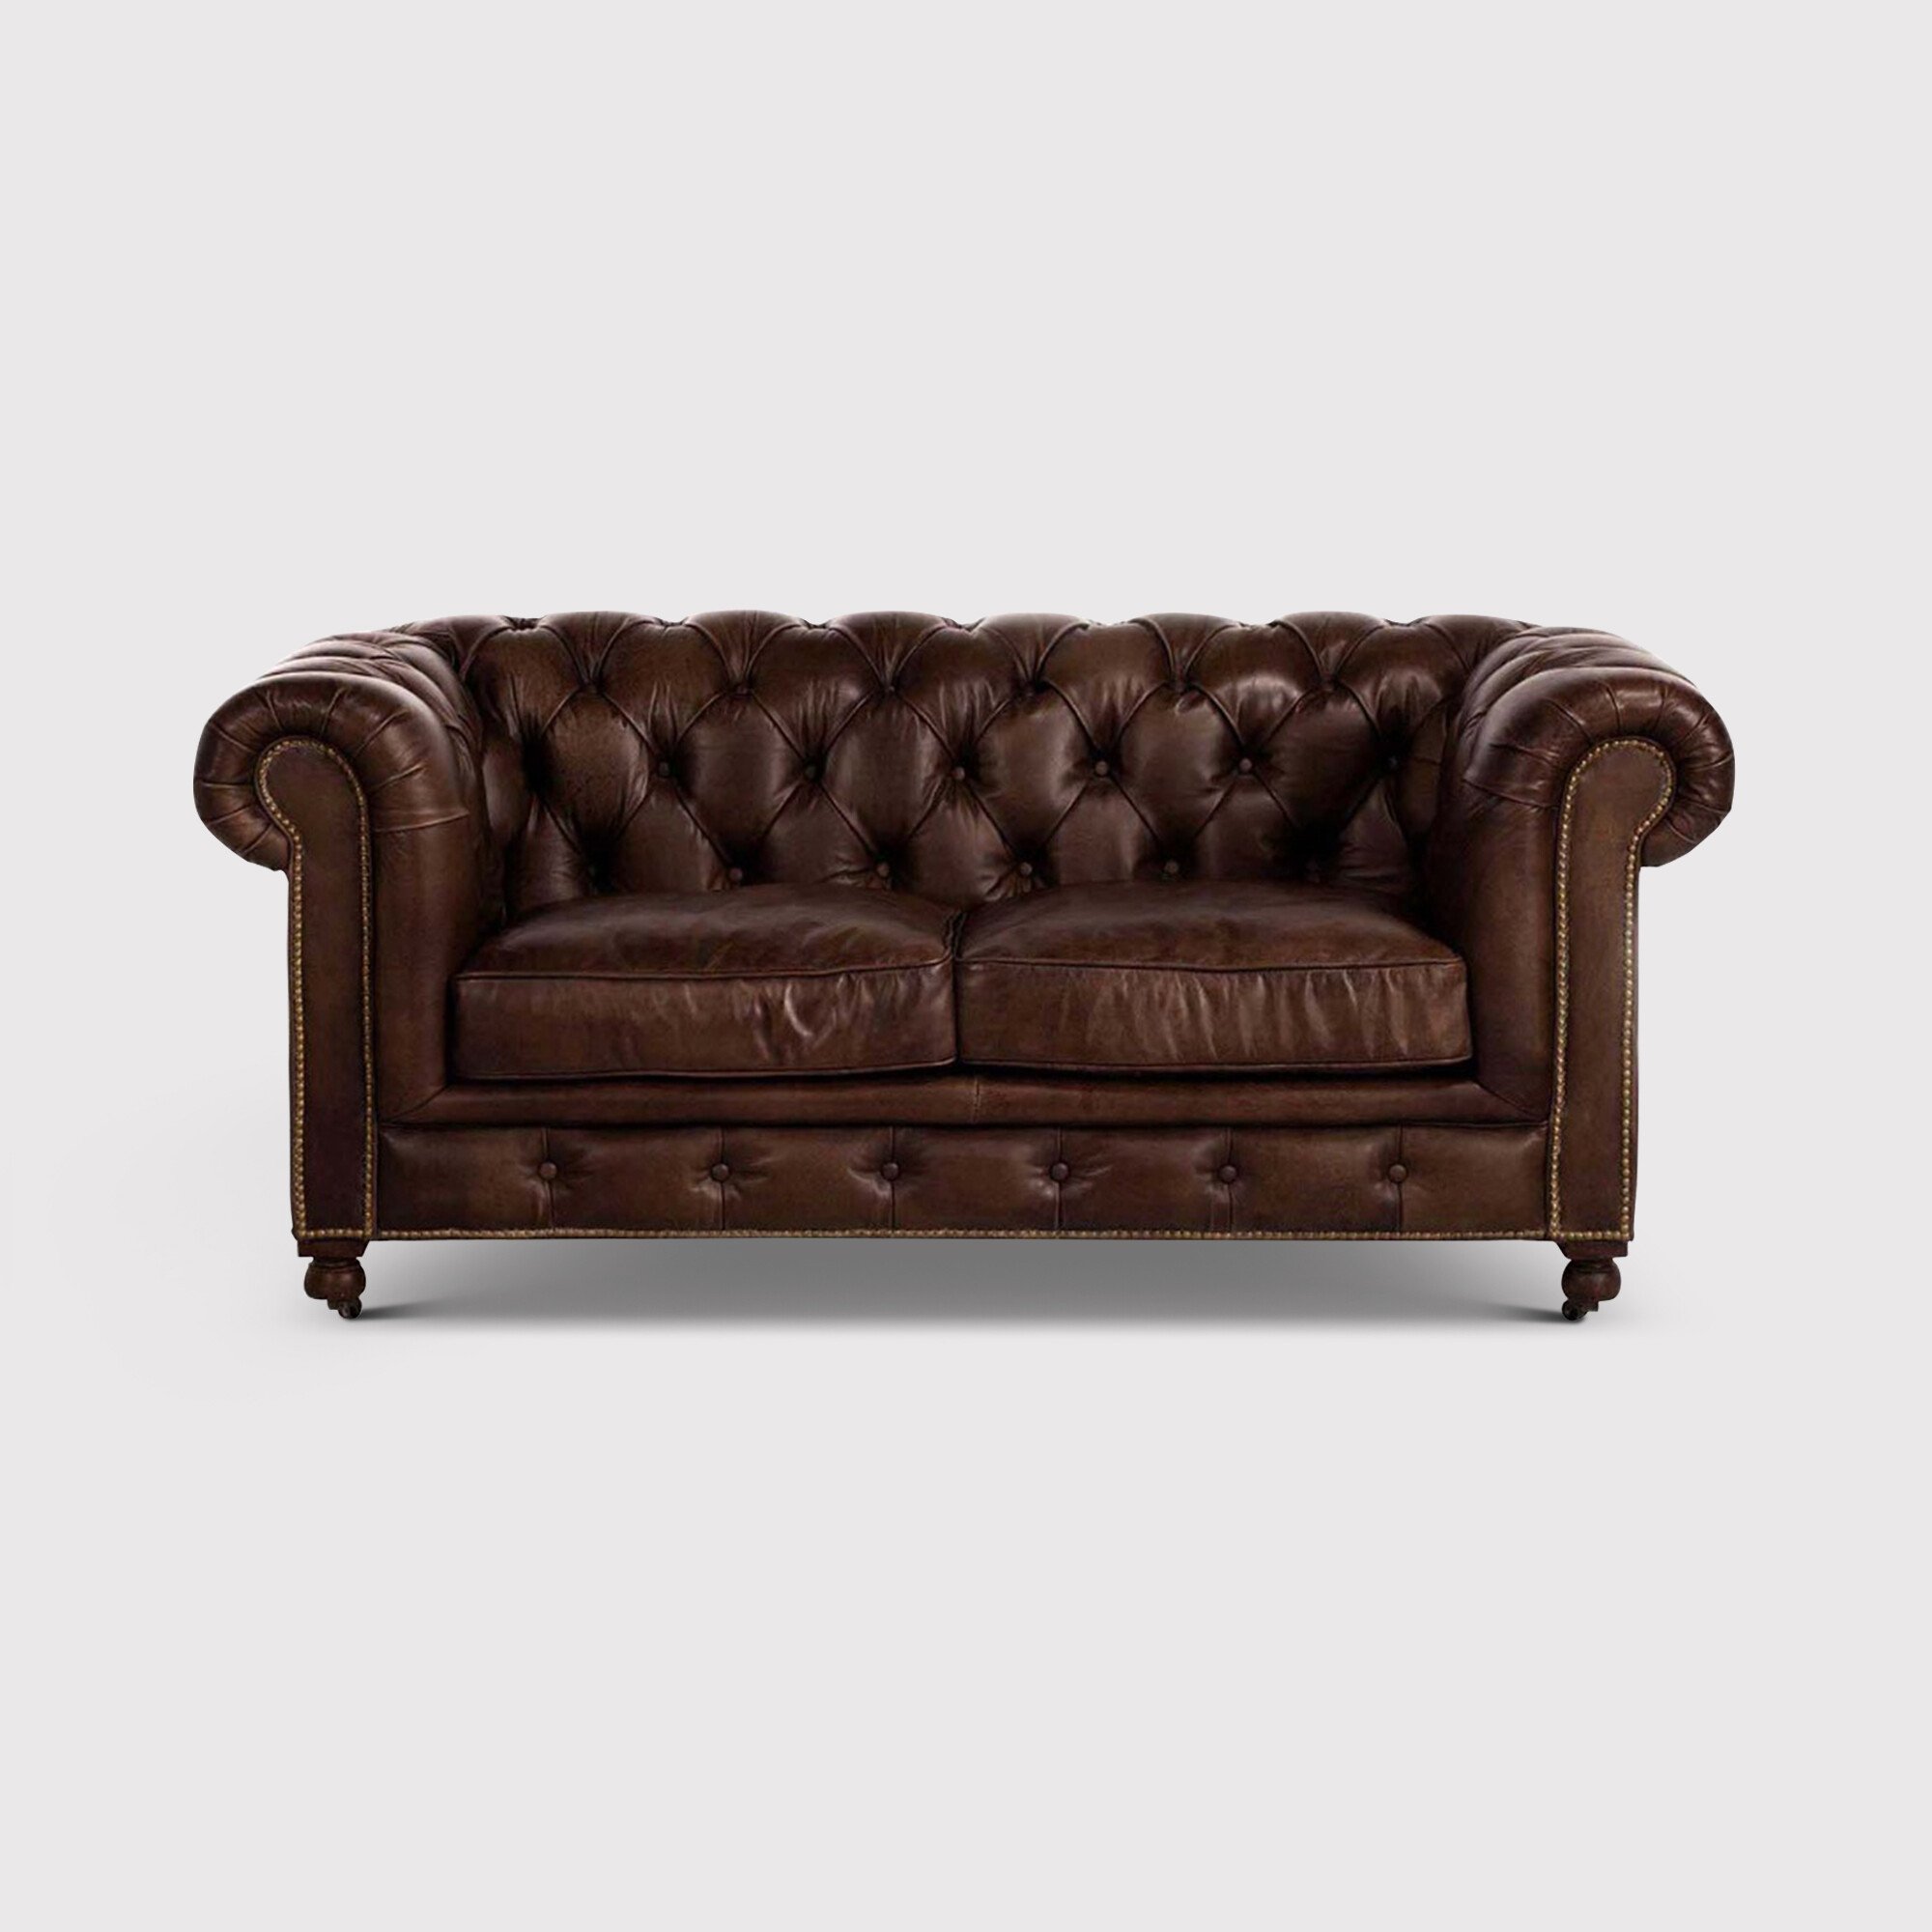 Asquith 2 Seater Chesterfield Sofa, Brown Leather | Barker & Stonehouse